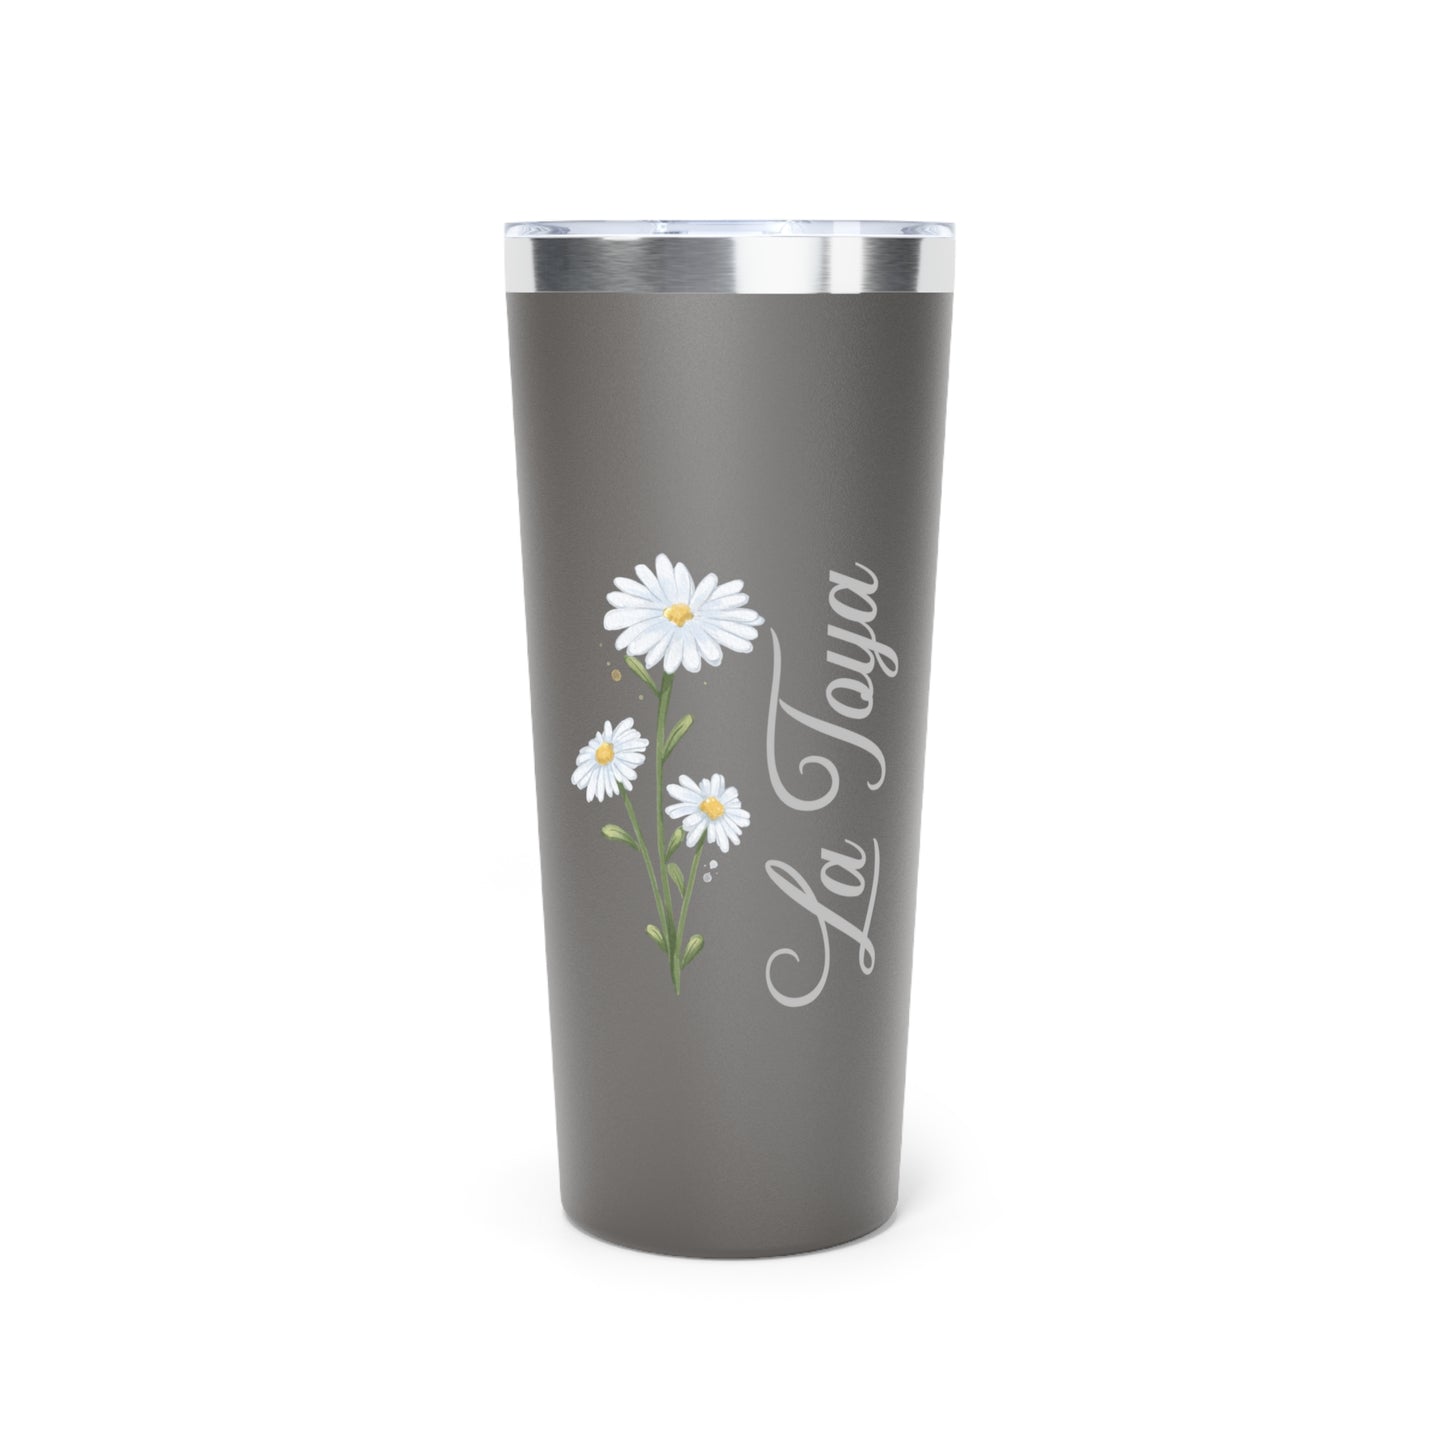 April Personalized Birth Flower Tumbler, Personalized Birth Flower Coffee Cup With Name, Gifts for Her, Bridesmaid Proposal, Party Favor